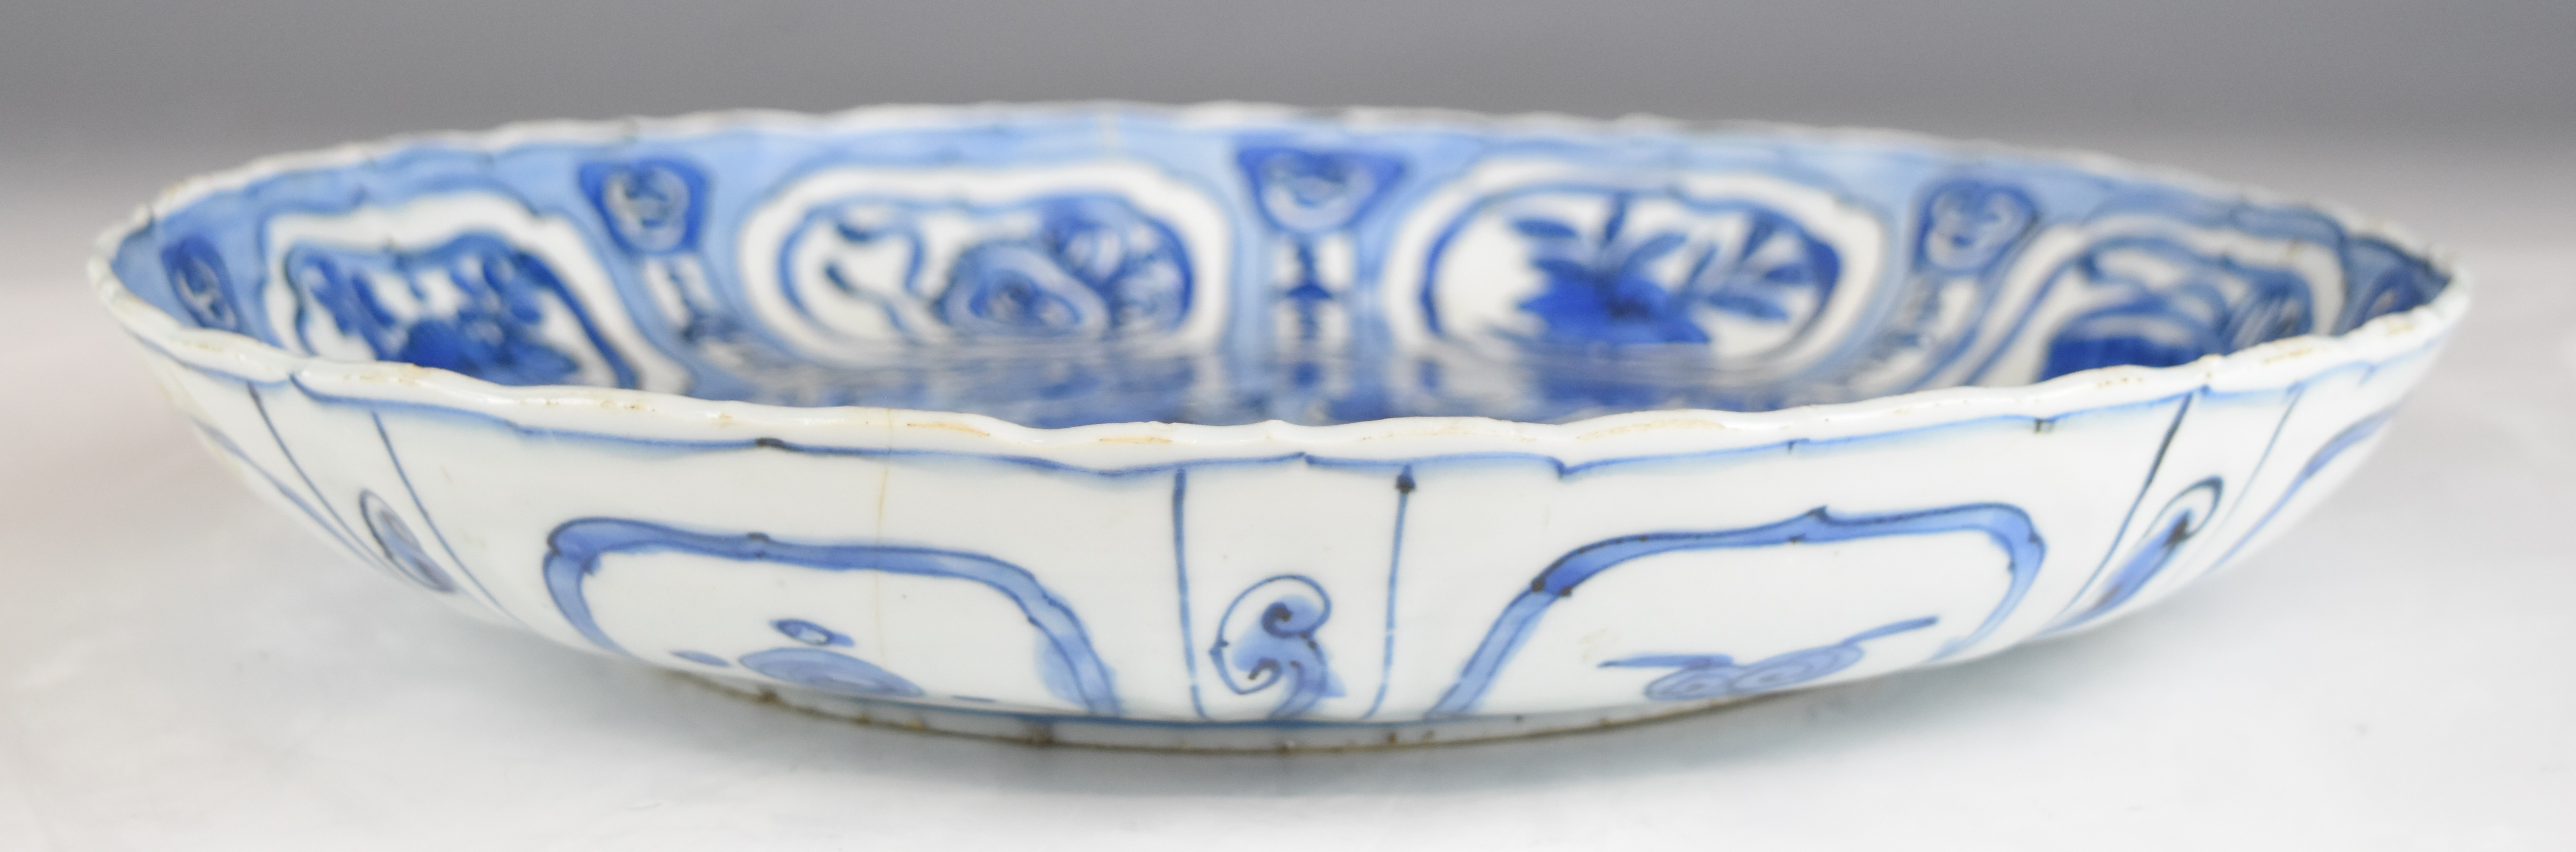 18th / 19thC Chinese Kraak porcelain charger with central decoration, diameter 31cm - Image 8 of 10